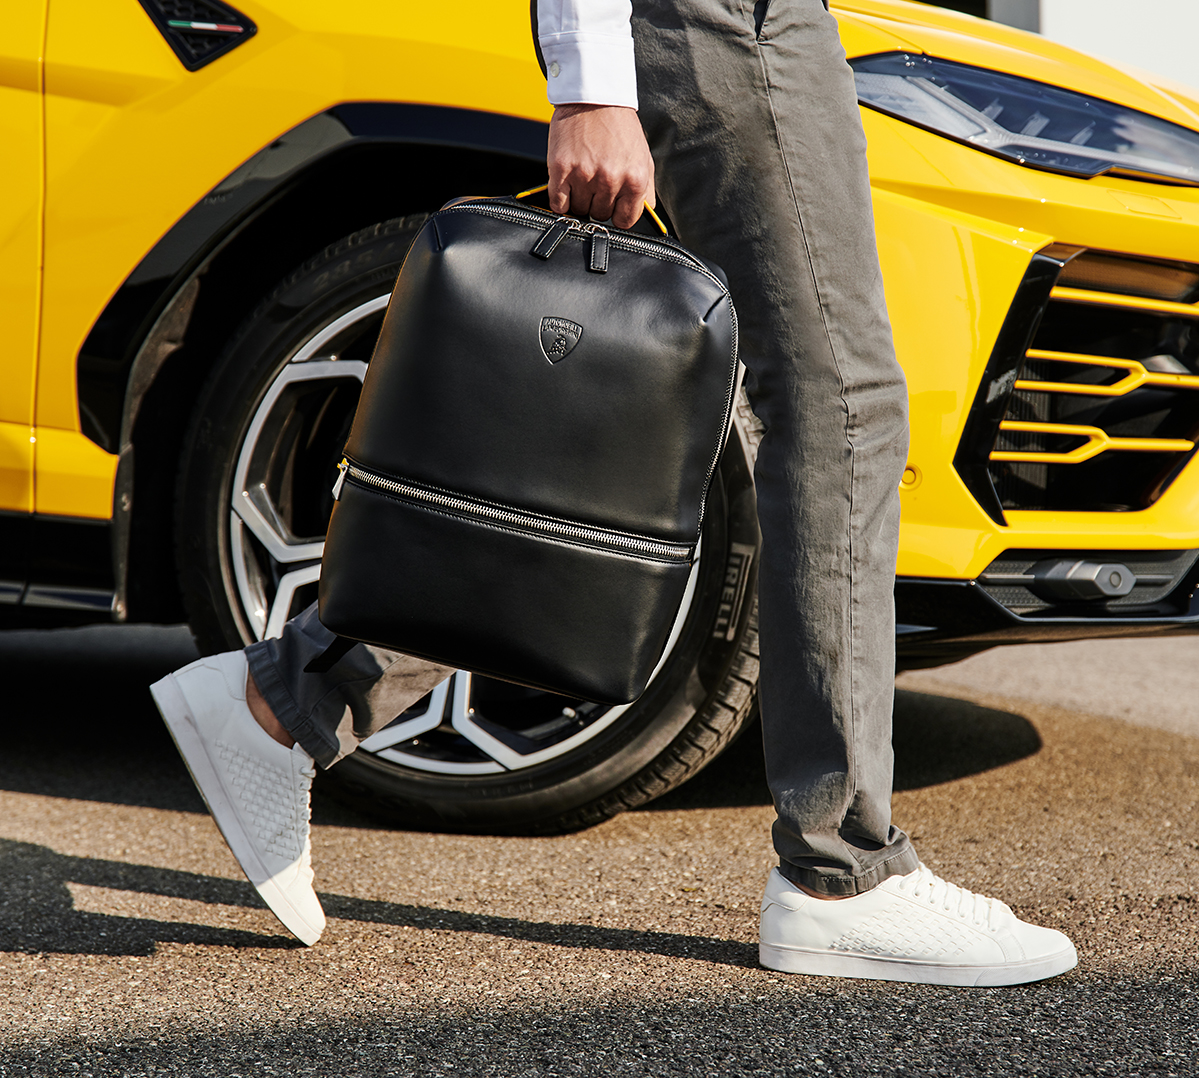 Lamborghini Aventador Travel Bag Set: Duffle Bag, Back-Pack & Rolling  Carry-On Trolley Luggage: Fits into the OEM Roadster & Coupe - DMC